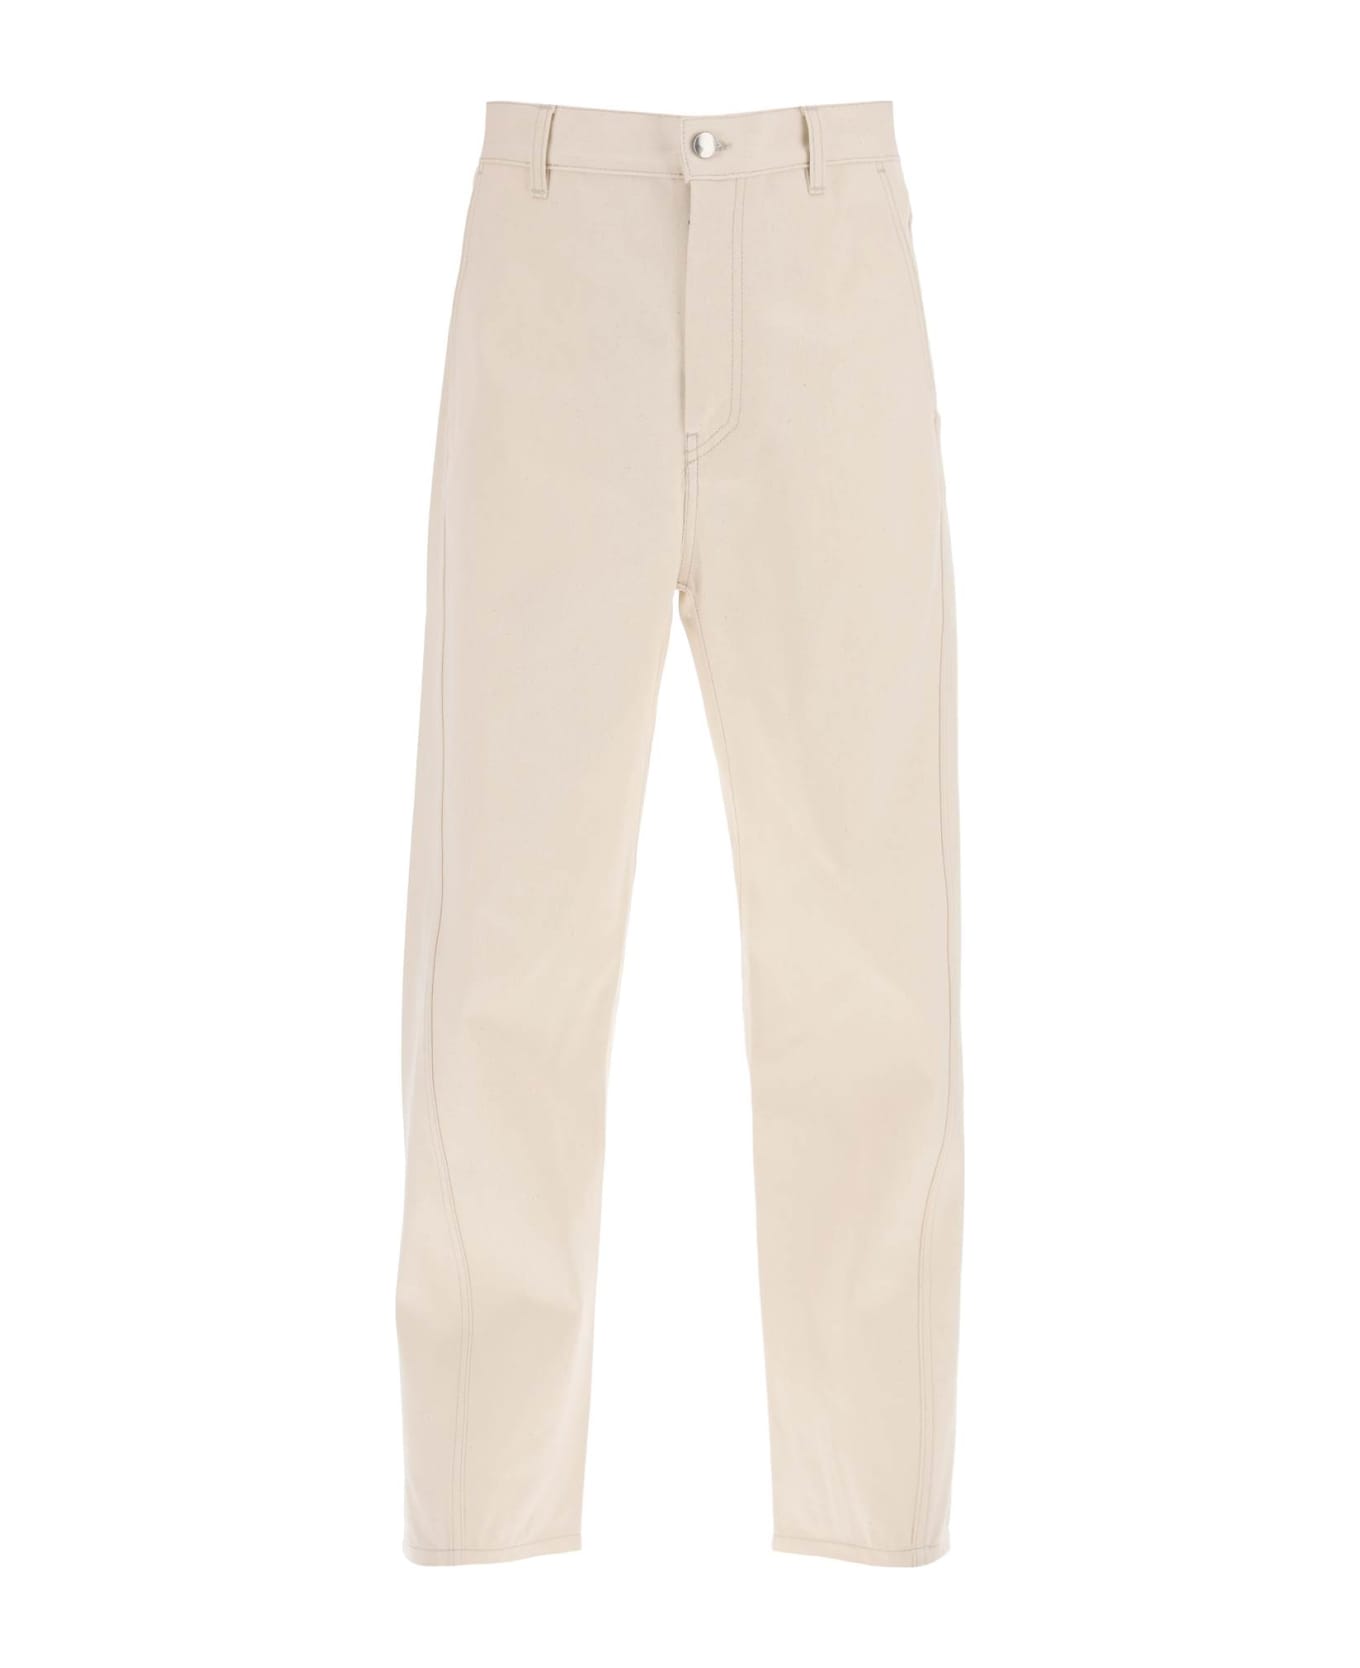 OAMC 'cortes' Cropped Jeans - NATURAL WHITE (Beige)